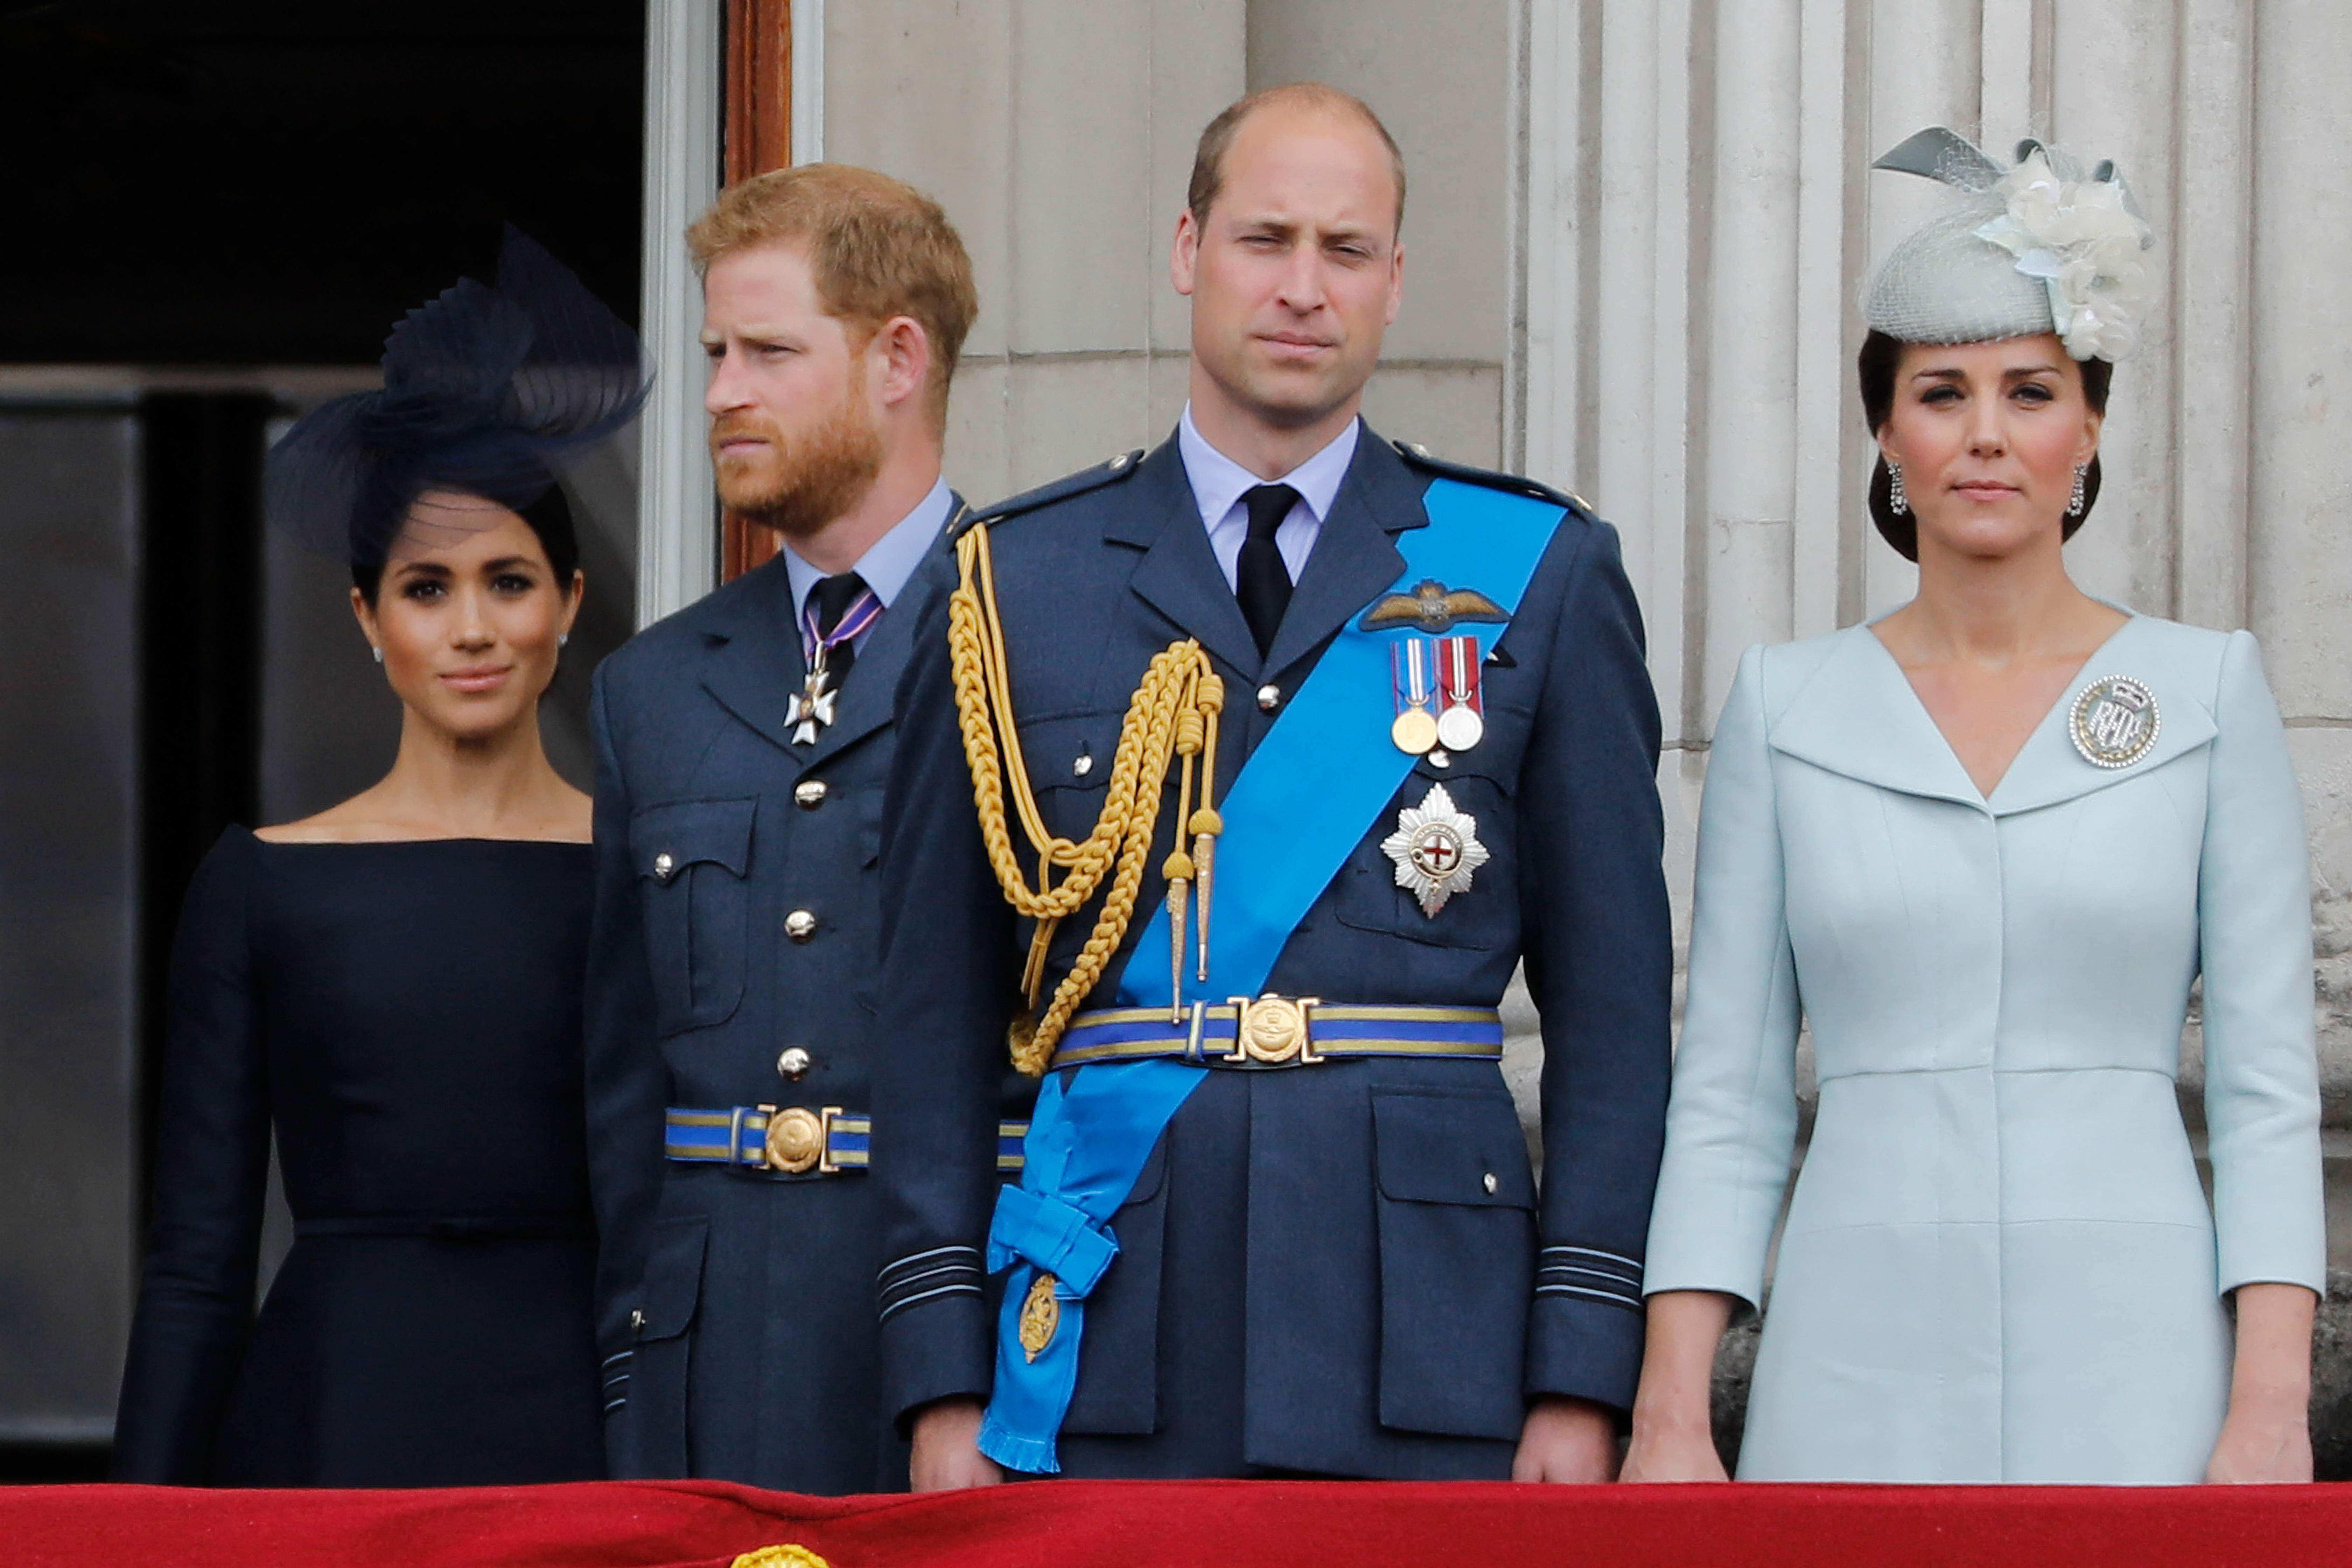 In this file photo taken on July 10, 2018 (L-R) Britains Meghan, Duchess of Sussex, Britains Prince Harry, Duke of Sussex, Britains Prince William, Duke of Cambridge and Britains Catherine, Duchess of Cambridge, stand on the balcony of Buckingham Palace on July 10, 2018 to watch a military fly-past to mark the centenary of the Royal Air Force (RAF). Photo:Tolga AKMEN / AFP